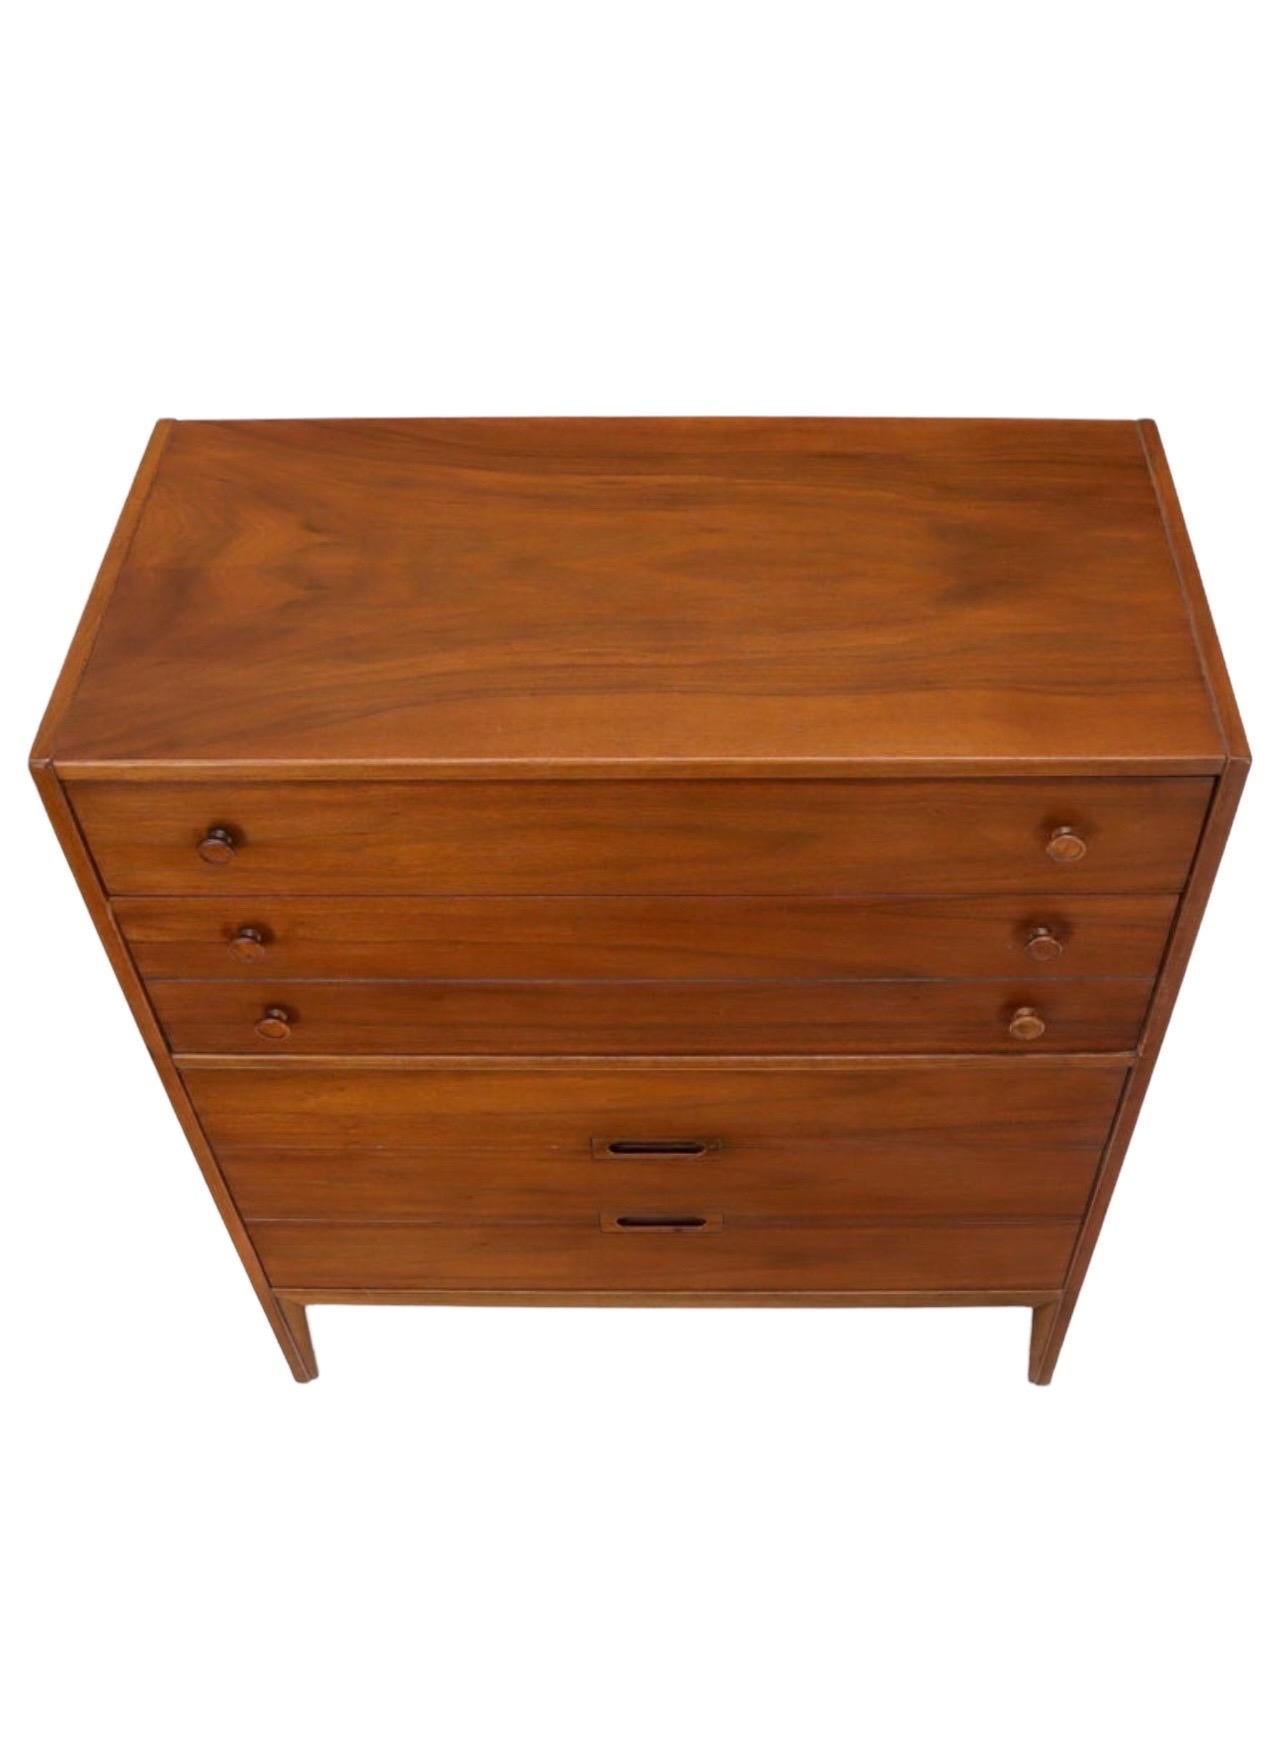 Mid-Century Modern walnut high chest of drawers. High quality craftsmanship and walnut wood selection along with solid oak interior.